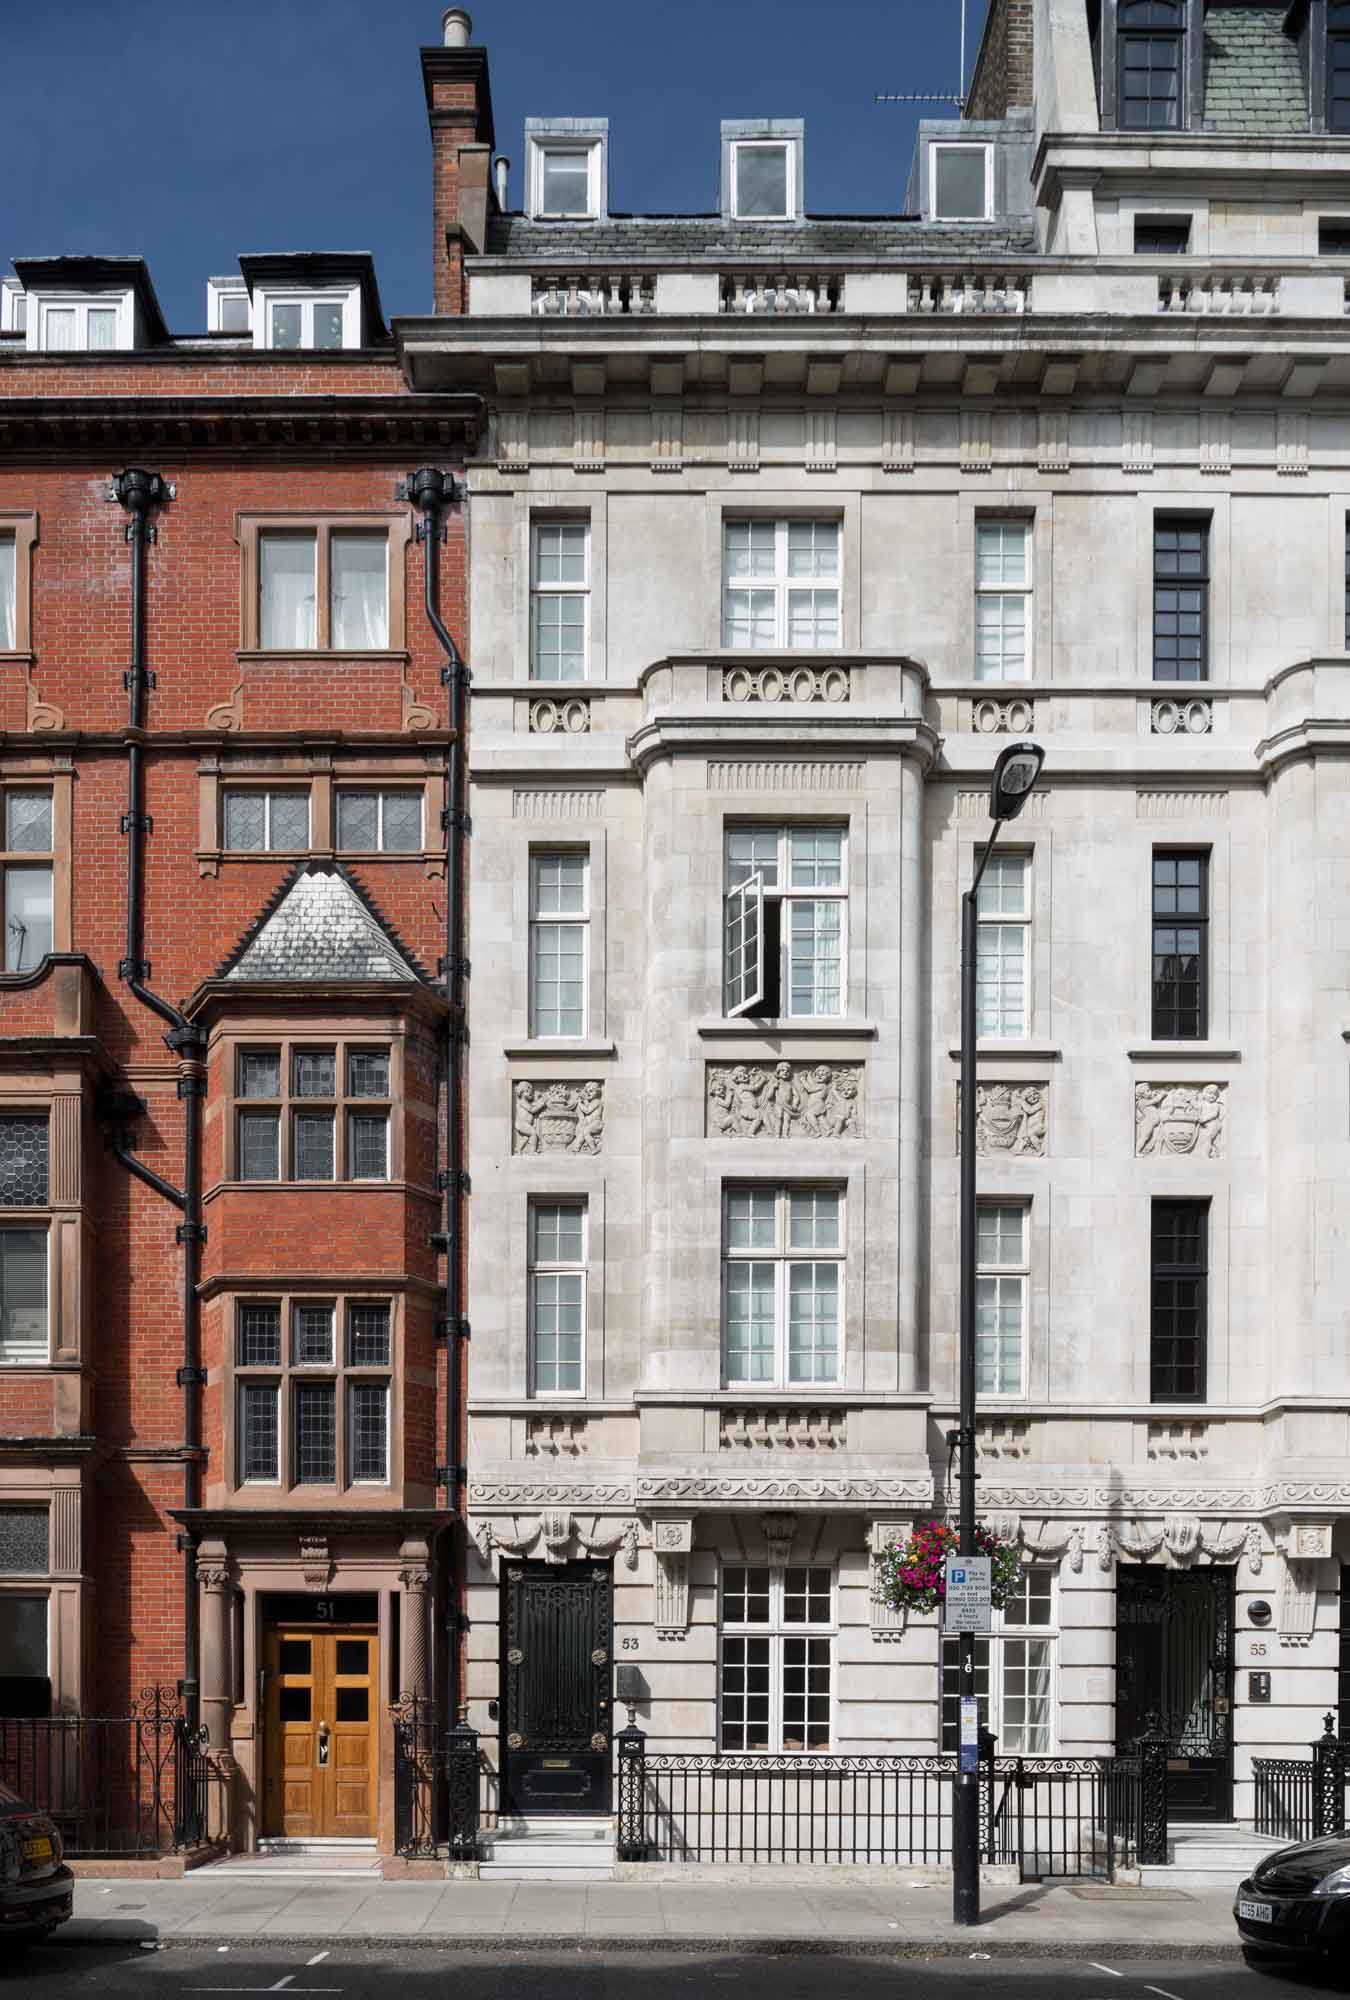 Nos 51 (left) and 53 Harley Street. No. 51was built in 1894 to designs by F. M. Elgood for the surgeon William Bruce Clarke on the site of the Turk's Head pub. No. 53 was designed by Wills & Kaula and completed in 1914-15 as a home and practice for the surgeon and urologist Frank Seymour Kidd.